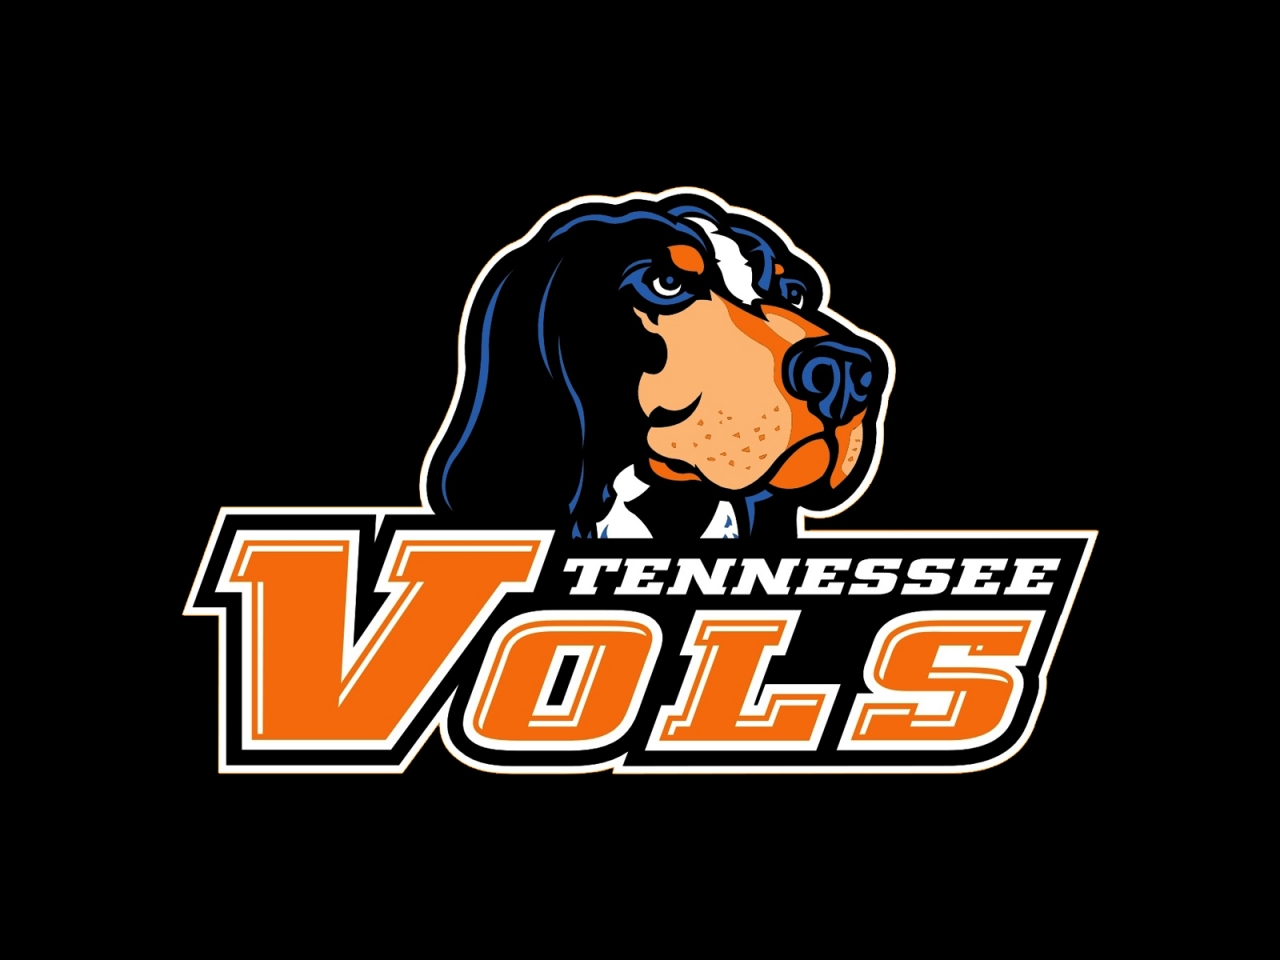 Tennessee Vols Logo Black for 1280 x 960 resolution